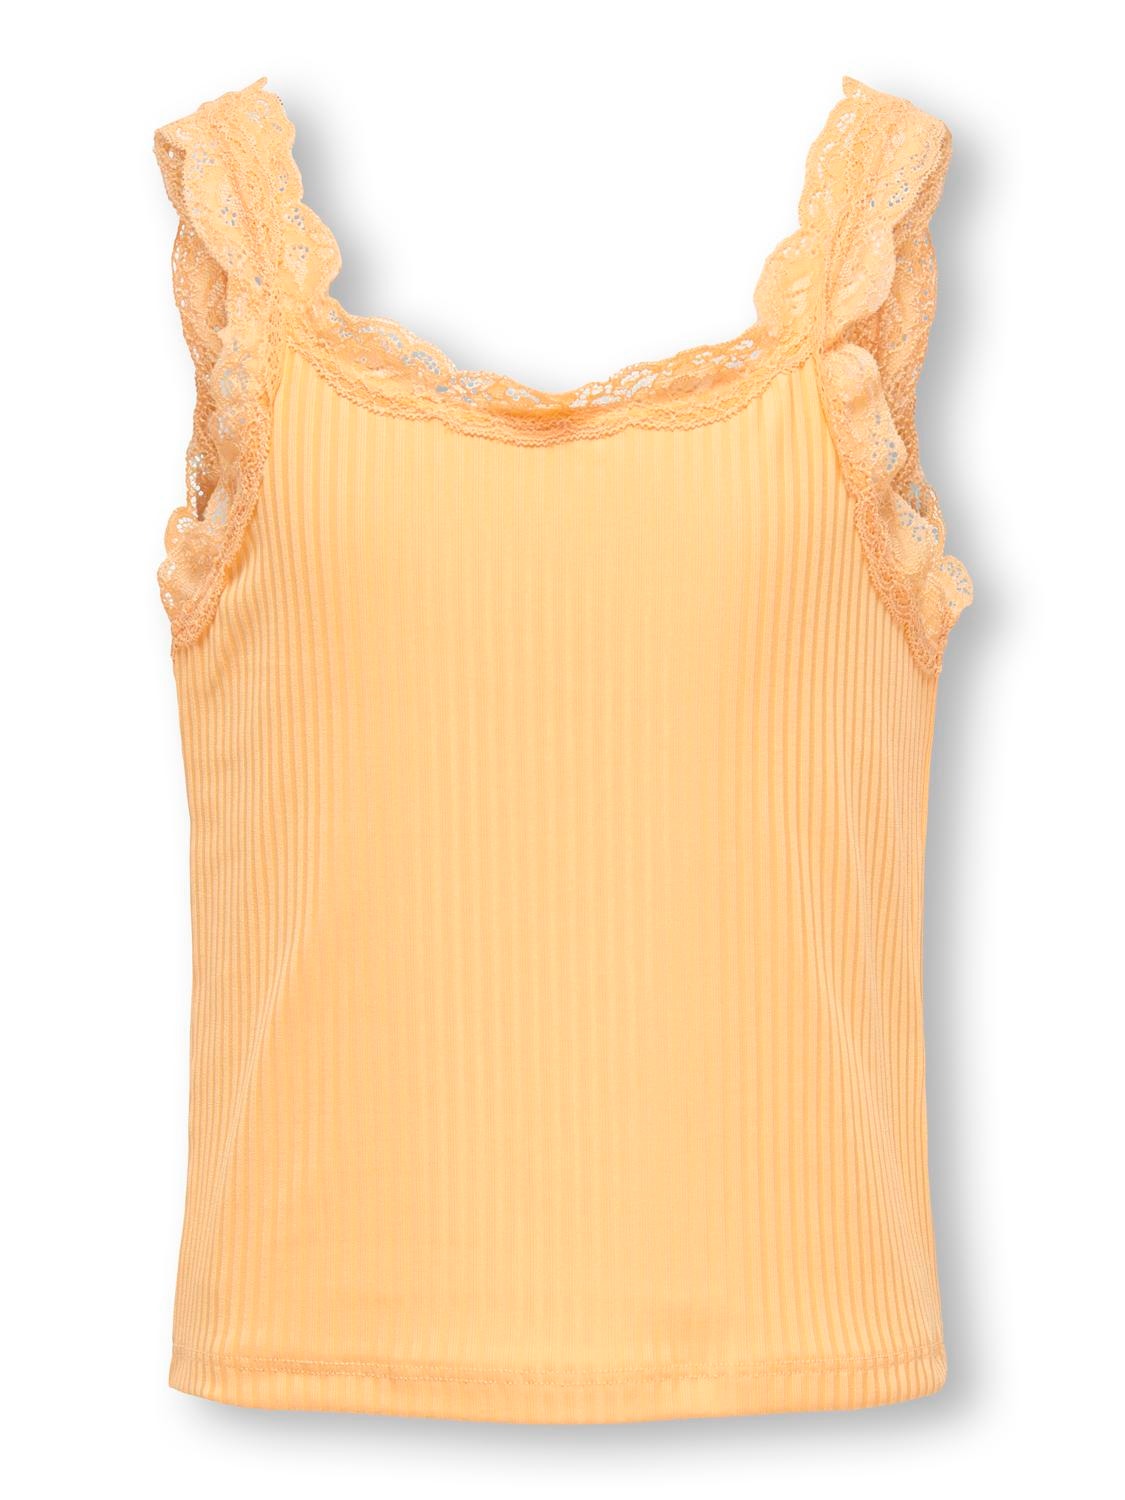 ONLY Top With Lace Edge -Orange Chiffon - 15300004